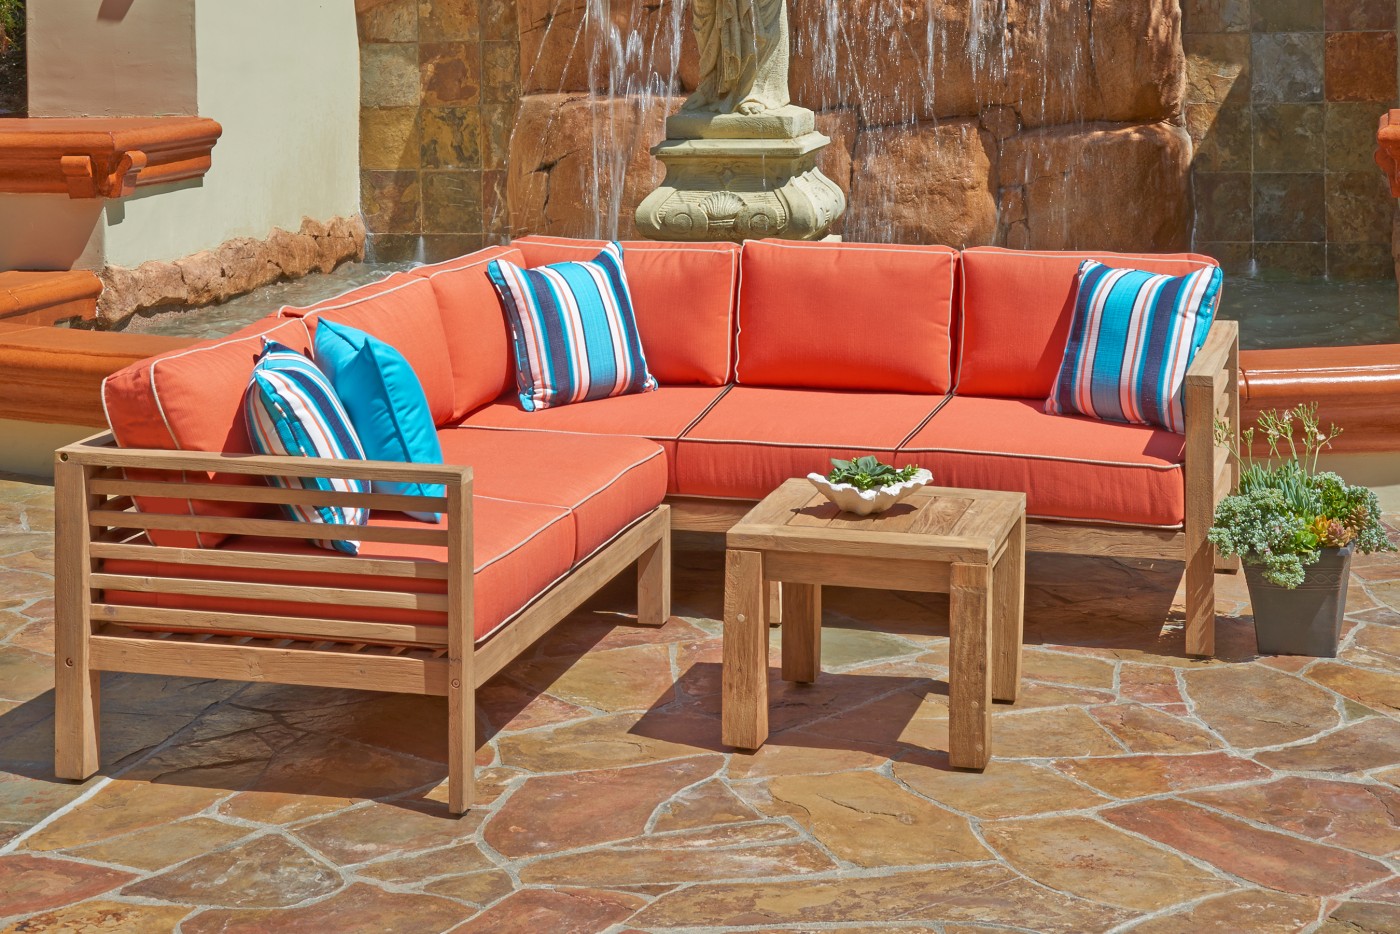 Outdoor Furniture Family Image